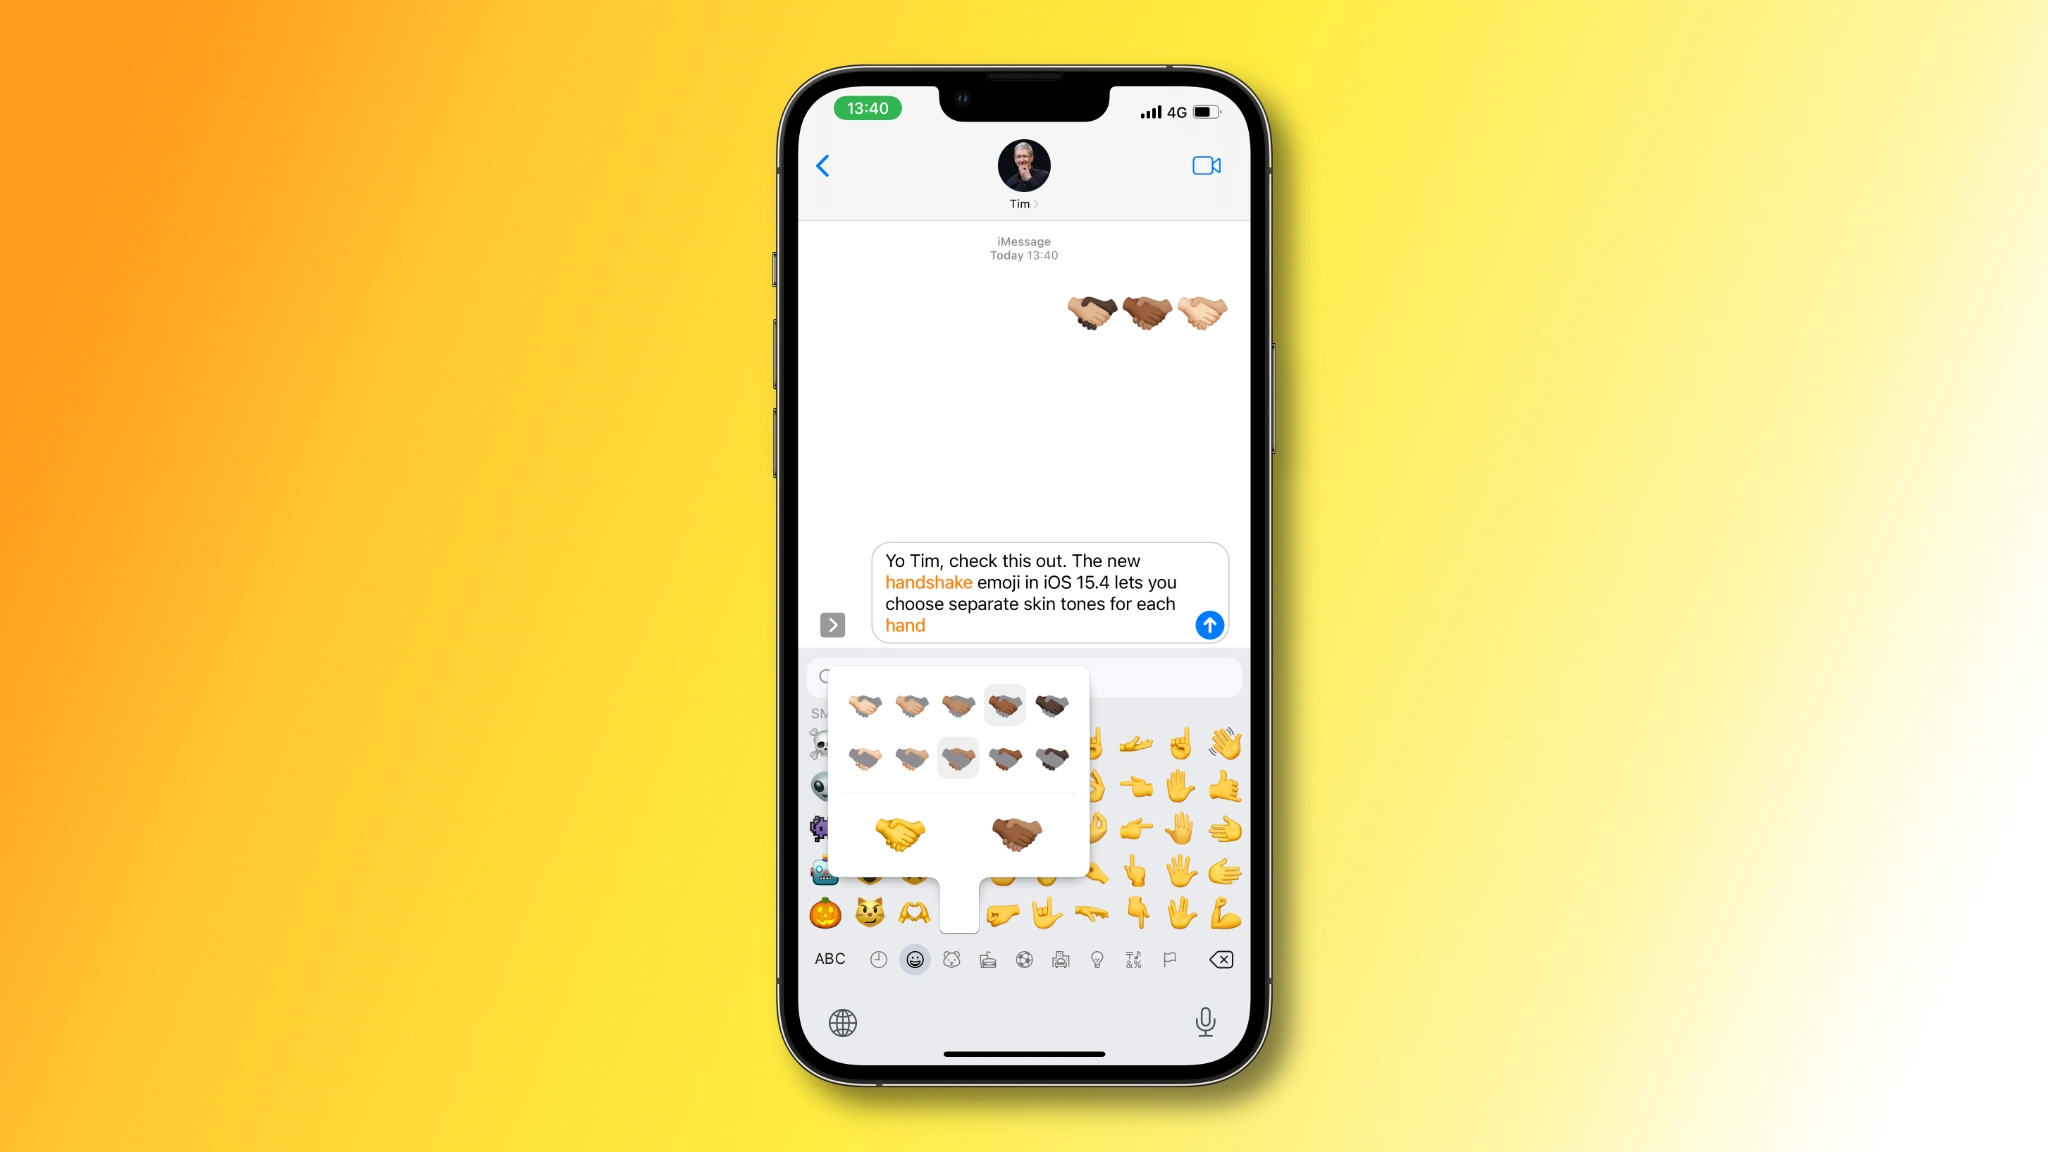 An iOS device screenshot showing setting skin tone separately for each hand of the handshake emoji in Apple Messages on iPhone